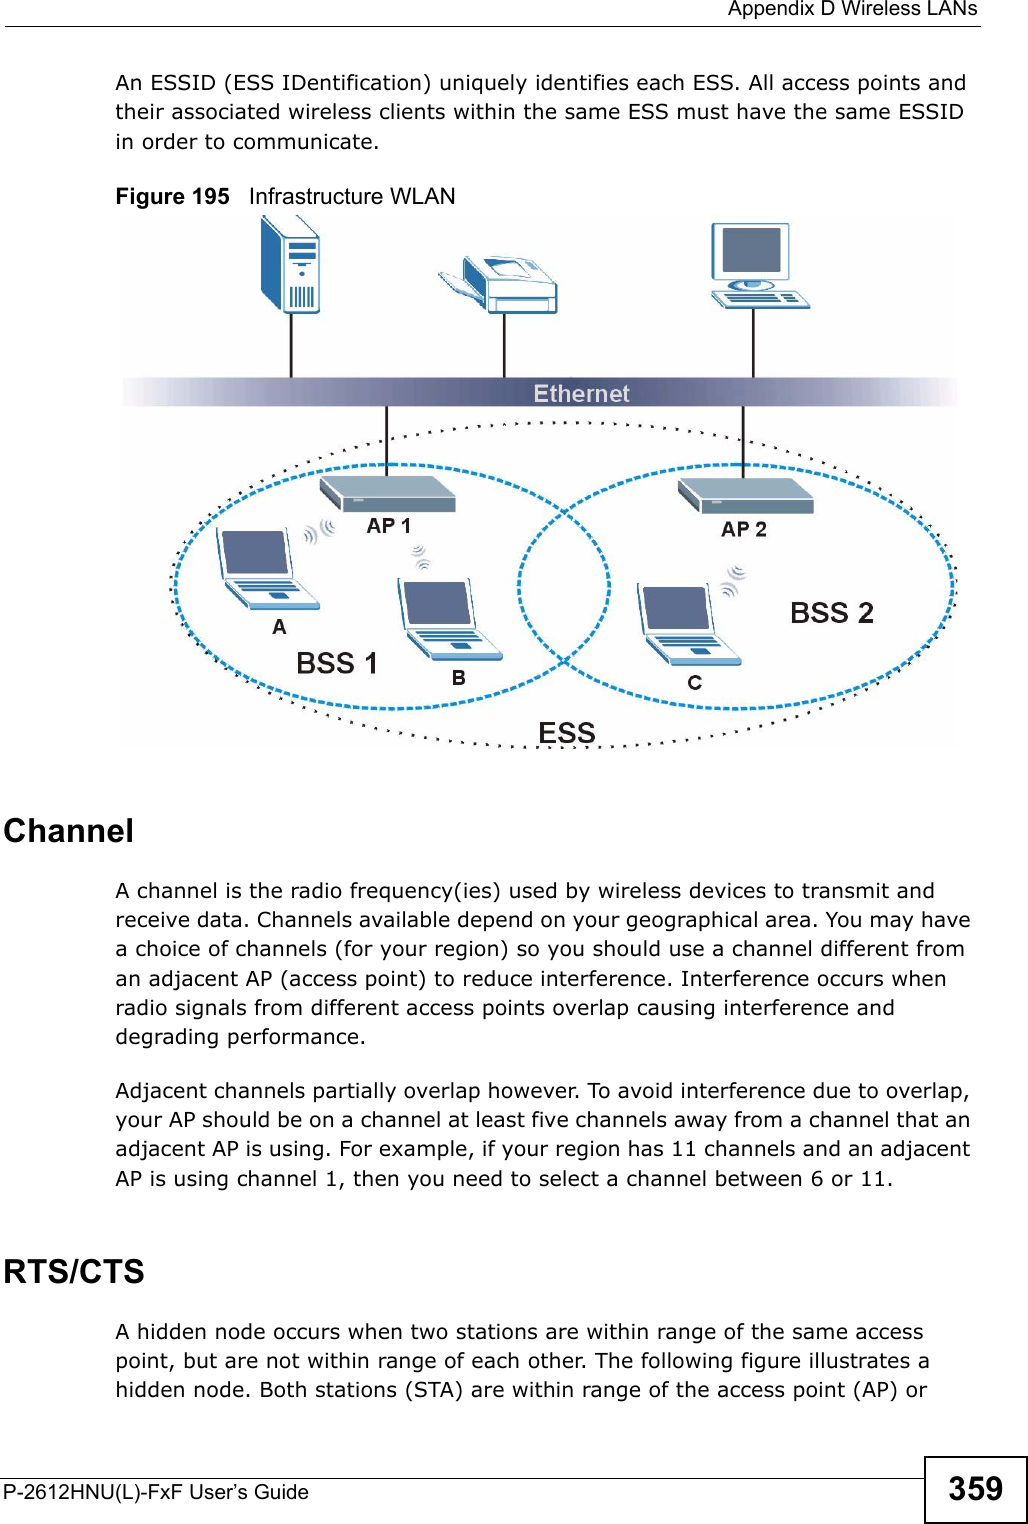 Appendix D Wireless LANsP-2612HNU(L)-FxF User’s Guide 359An ESSID (ESS IDentification) uniquely identifies each ESS. All access points and their associated wireless clients within the same ESS must have the same ESSID in order to communicate.Figure 195   Infrastructure WLANChannelA channel is the radio frequency(ies) used by wireless devices to transmit andreceive data. Channels available depend on your geographical area. You may havea choice of channels (for your region) so you should use a channel different from an adjacent AP (access point) to reduce interference. Interference occurs whenradio signals from different access points overlap causing interference anddegrading performance.Adjacent channels partially overlap however. To avoid interference due to overlap,your AP should be on a channel at least five channels away from a channel that an adjacent AP is using. For example, if your region has 11 channels and an adjacent AP is using channel 1, then you need to select a channel between 6 or 11.RTS/CTSA hidden node occurs when two stations are within range of the same access point, but are not within range of each other. The following figure illustrates a hidden node. Both stations (STA) are within range of the access point (AP) or 